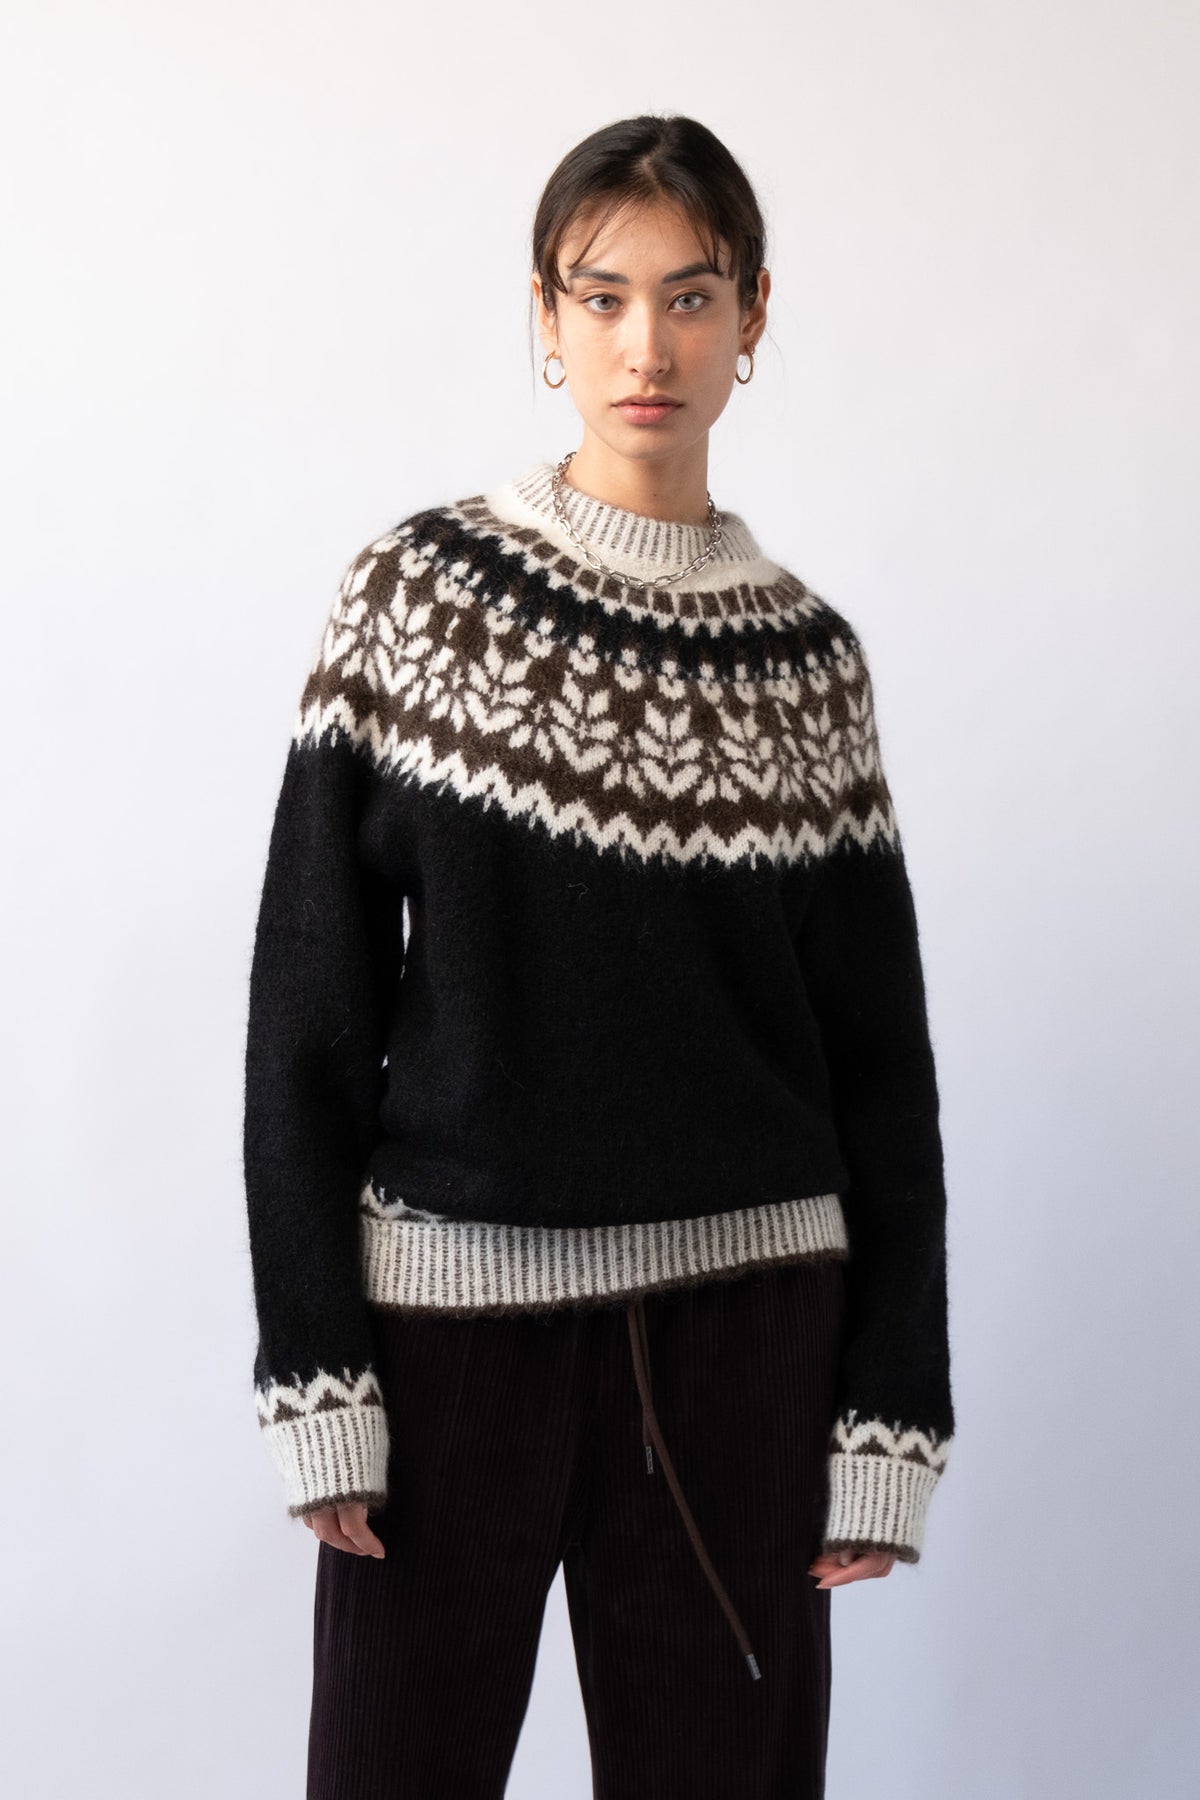 New Year Cashmere Sweater